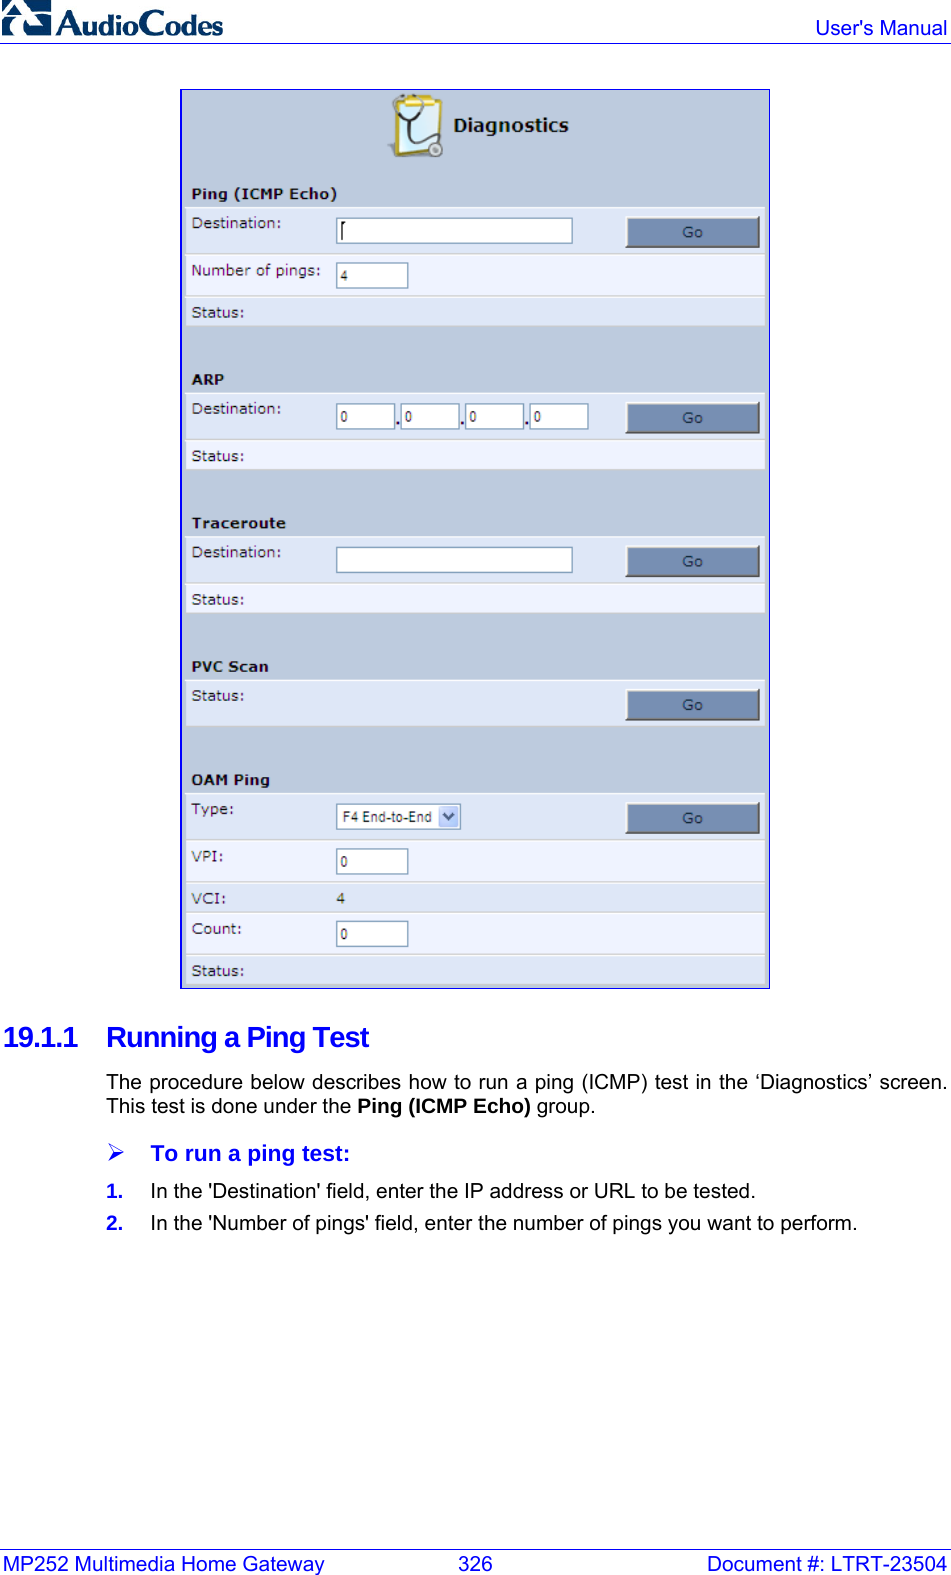 MP252 Multimedia Home Gateway  326  Document #: LTRT-23504  User&apos;s Manual   19.1.1  Running a Ping Test The procedure below describes how to run a ping (ICMP) test in the ‘Diagnostics’ screen. This test is done under the Ping (ICMP Echo) group. ¾ To run a ping test: 1.  In the &apos;Destination&apos; field, enter the IP address or URL to be tested. 2.  In the &apos;Number of pings&apos; field, enter the number of pings you want to perform. 